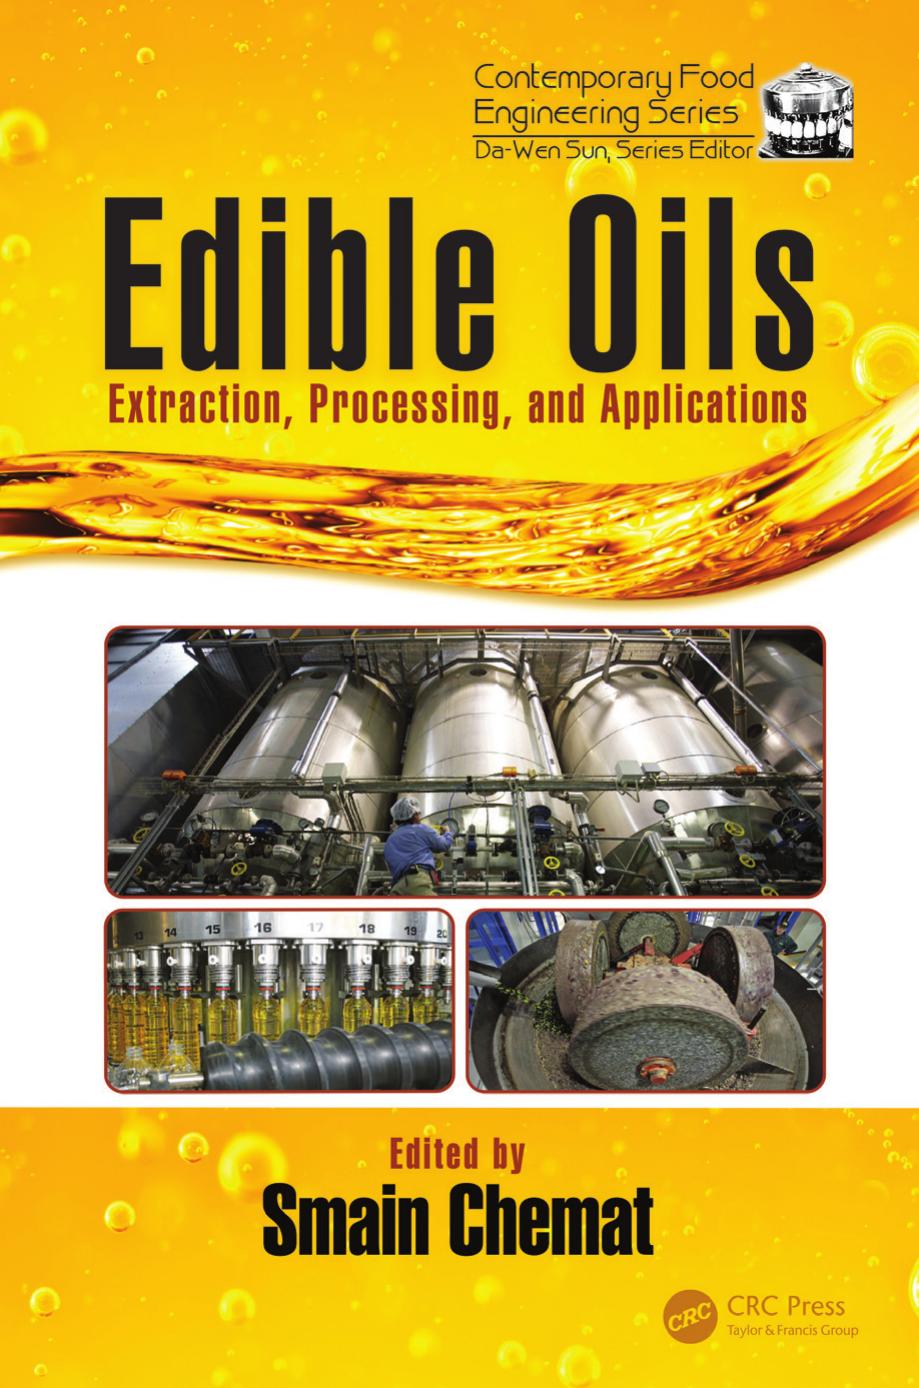 Edible Oils: Extraction, Processing, and Applications